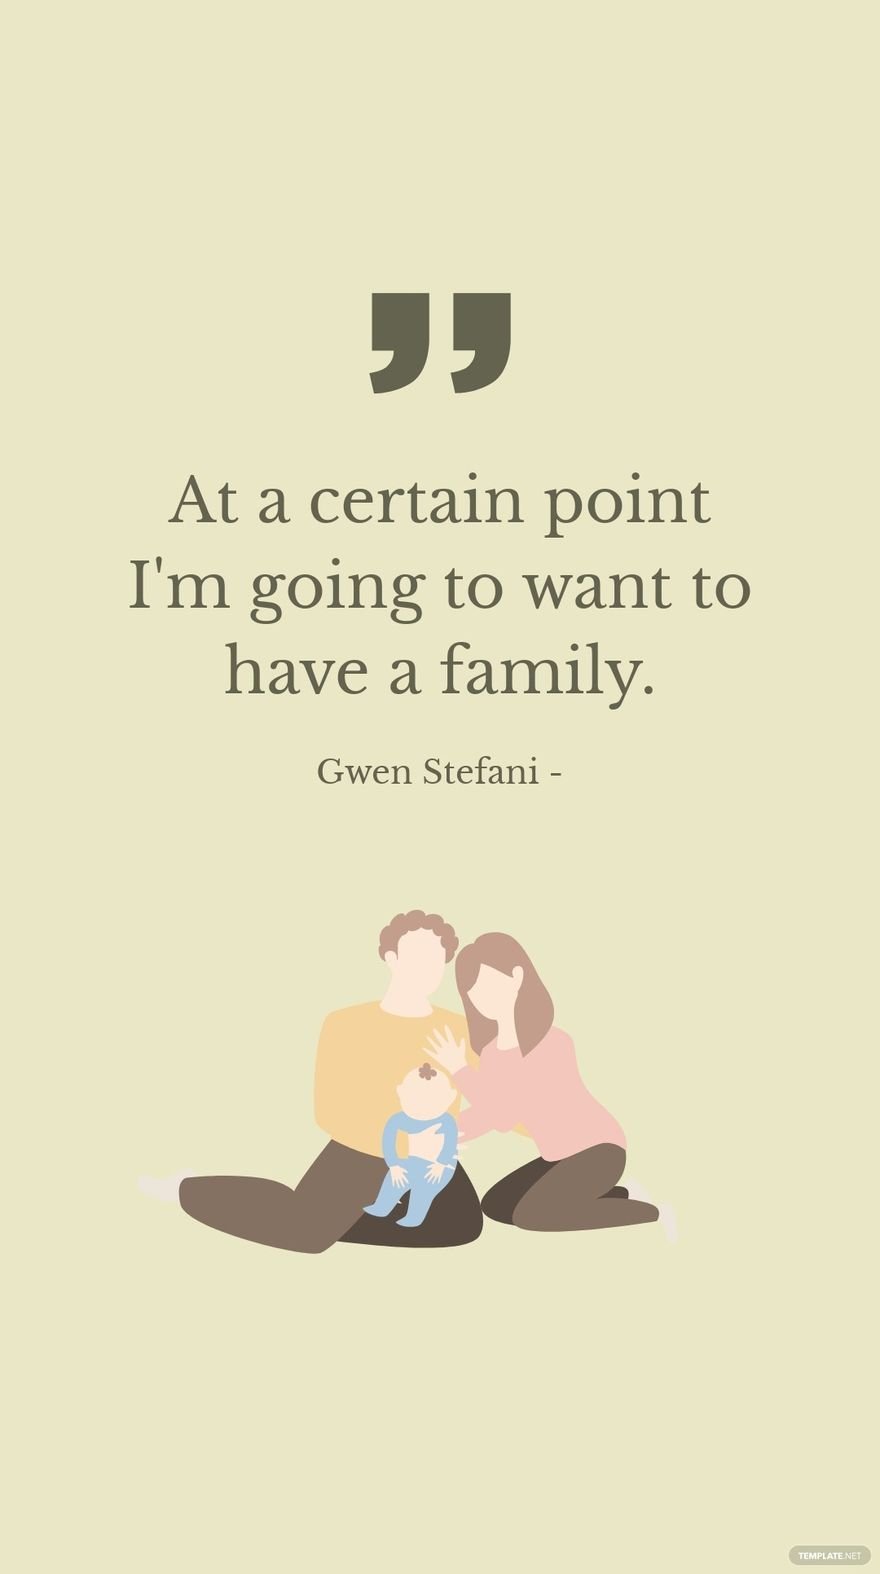 Gwen Stefani - At a certain point I'm going to want to have a family.